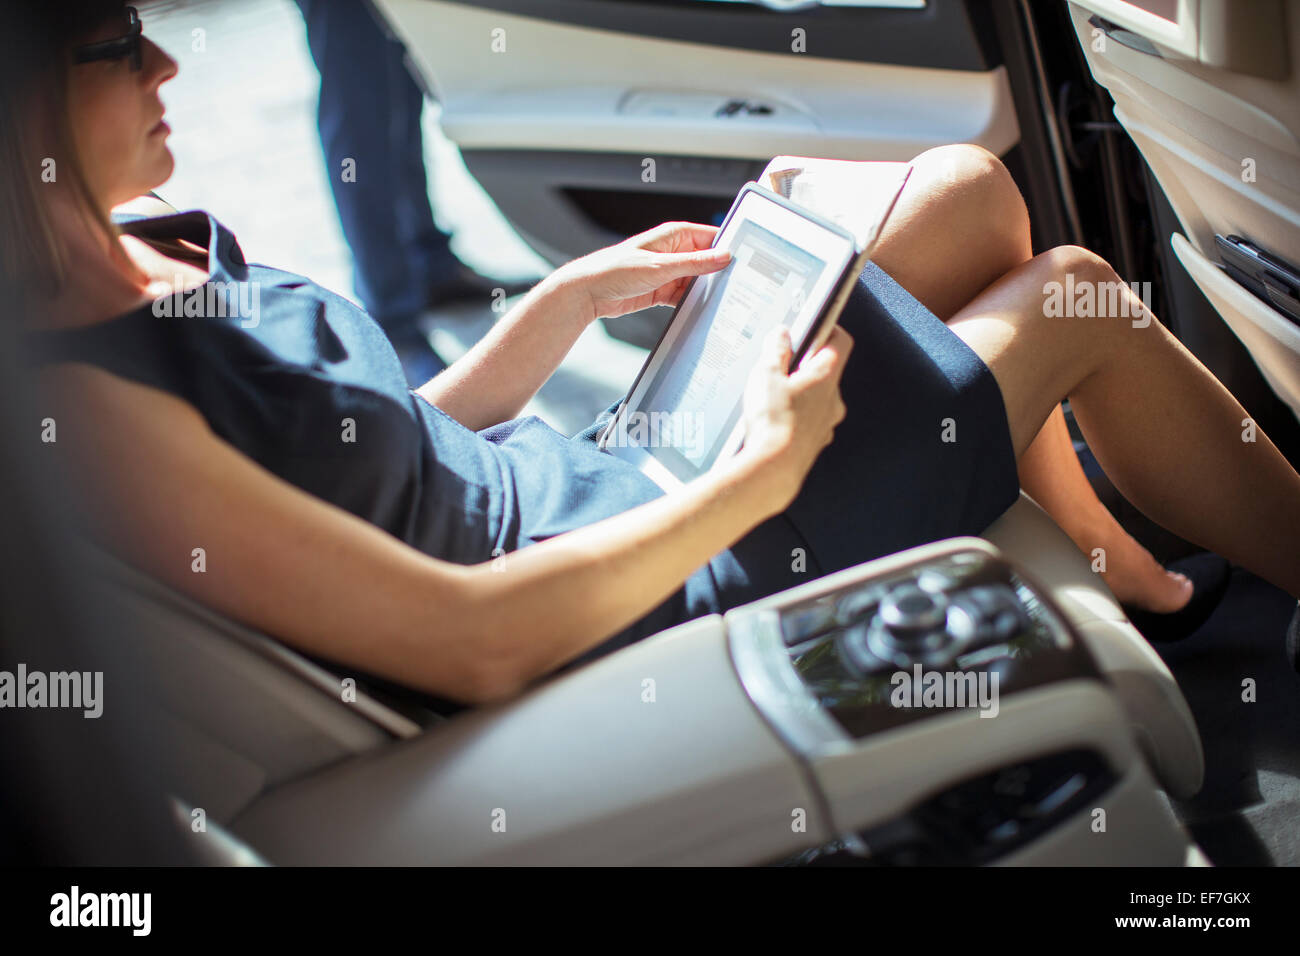 Businesswoman using digital tablet in back seat of car Banque D'Images